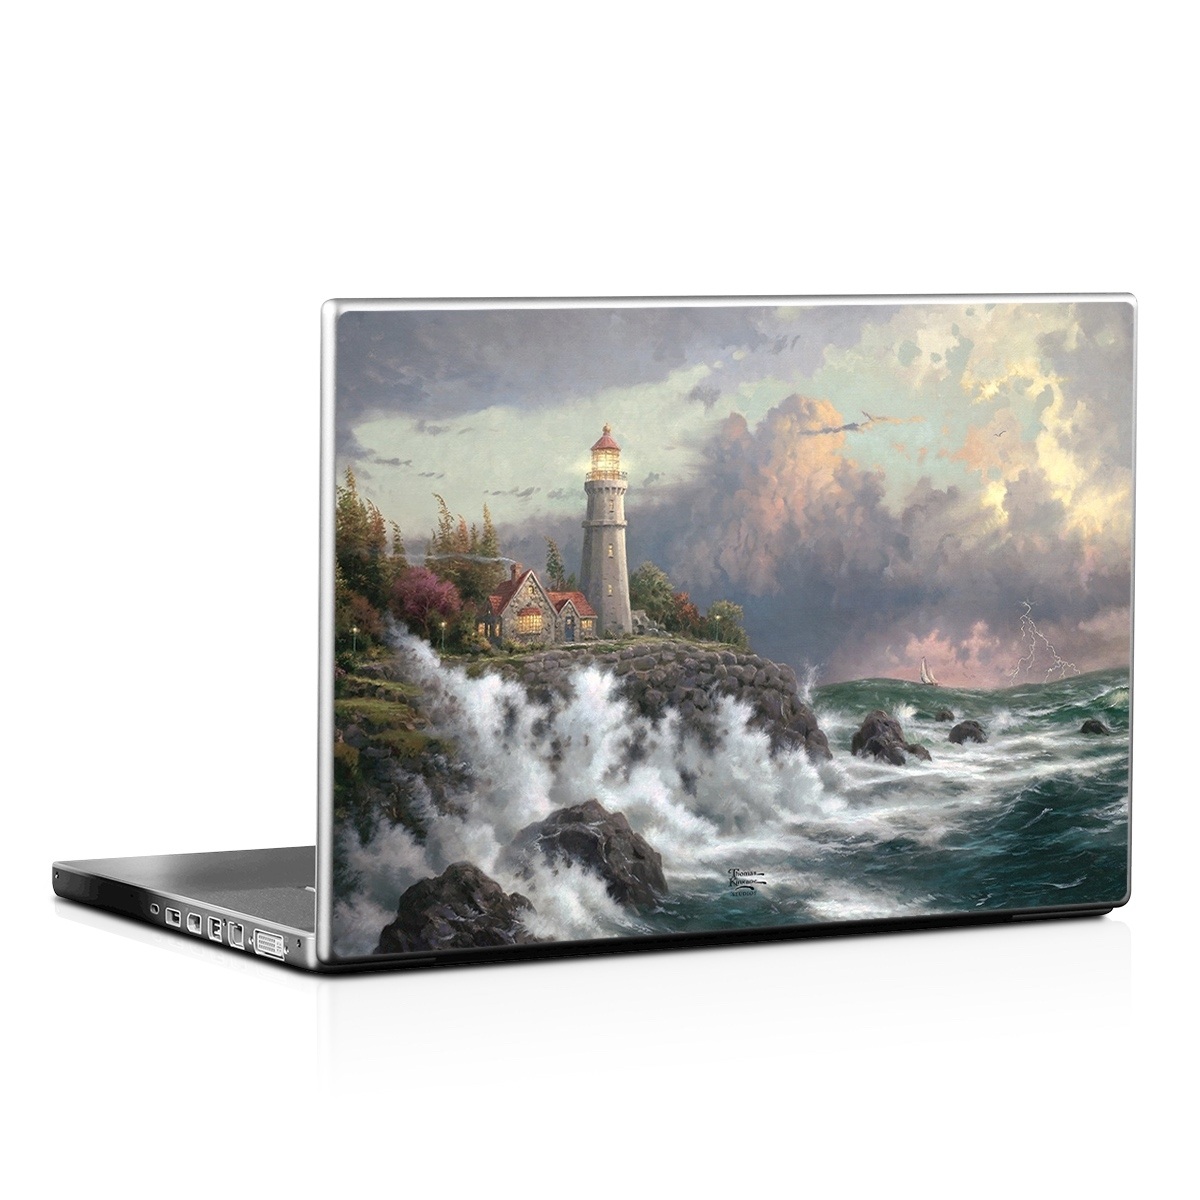 Laptop Skin - Conquering the Storms (Image 1)